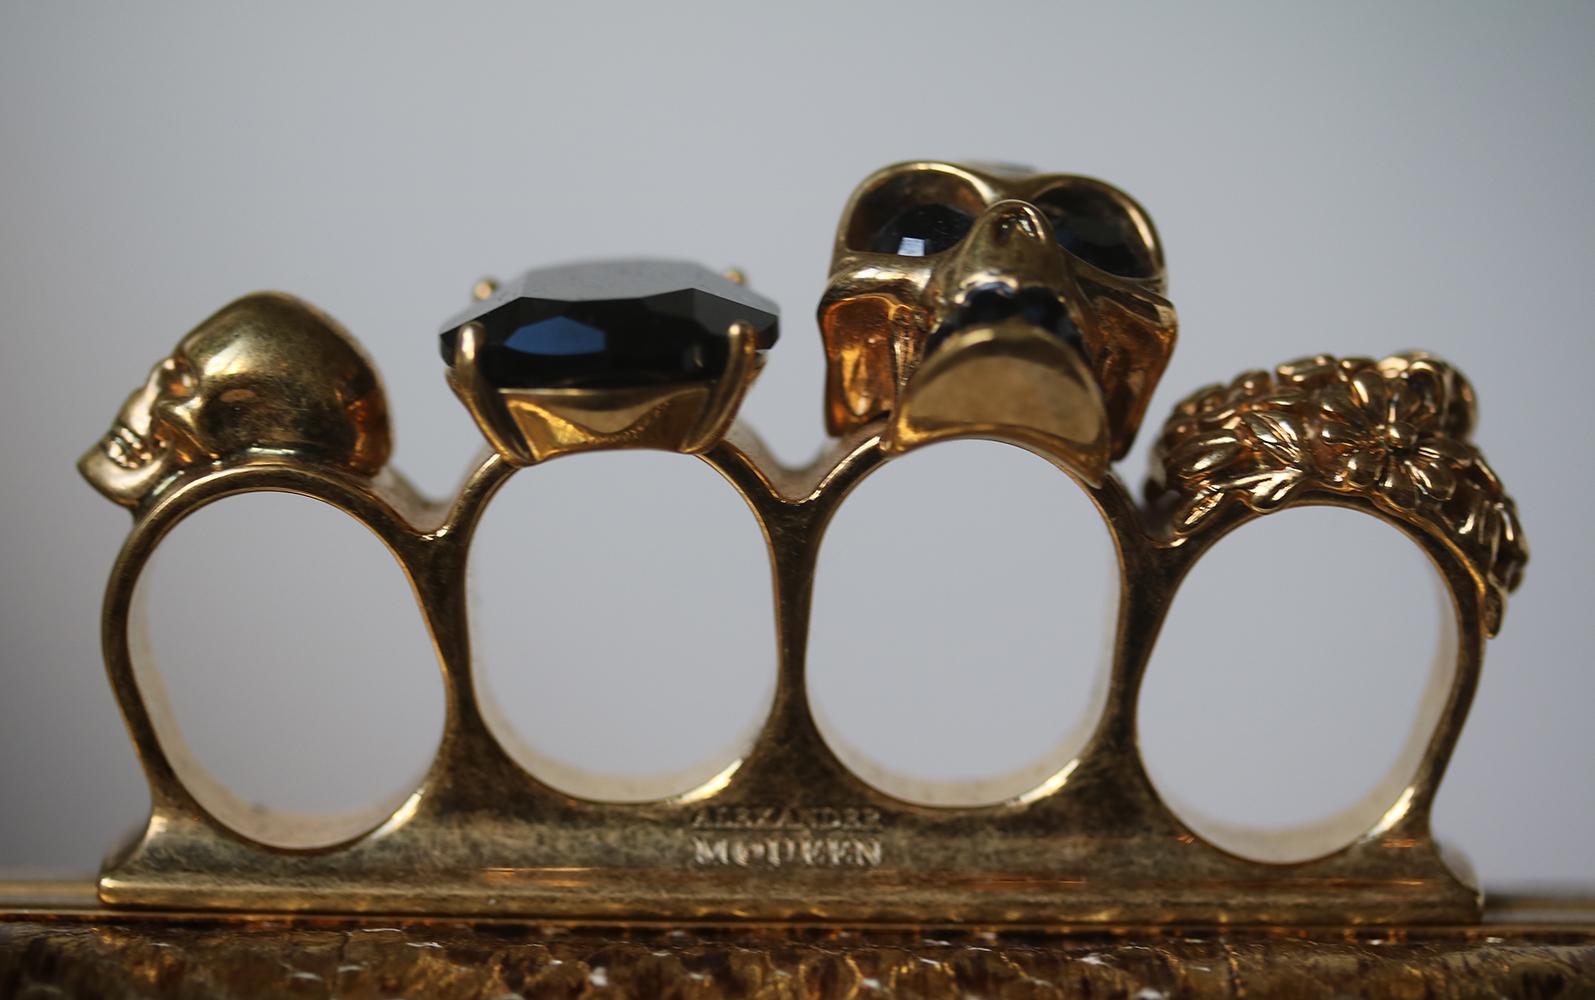 A classic Alexander McQueen Crystal encrusted and gold tone Skull Knuckle duster American Box Clutch, engraved name to the knuckle plate and embossed in the inside leather . Gold python edition with the brown leather interior, highly desirable.